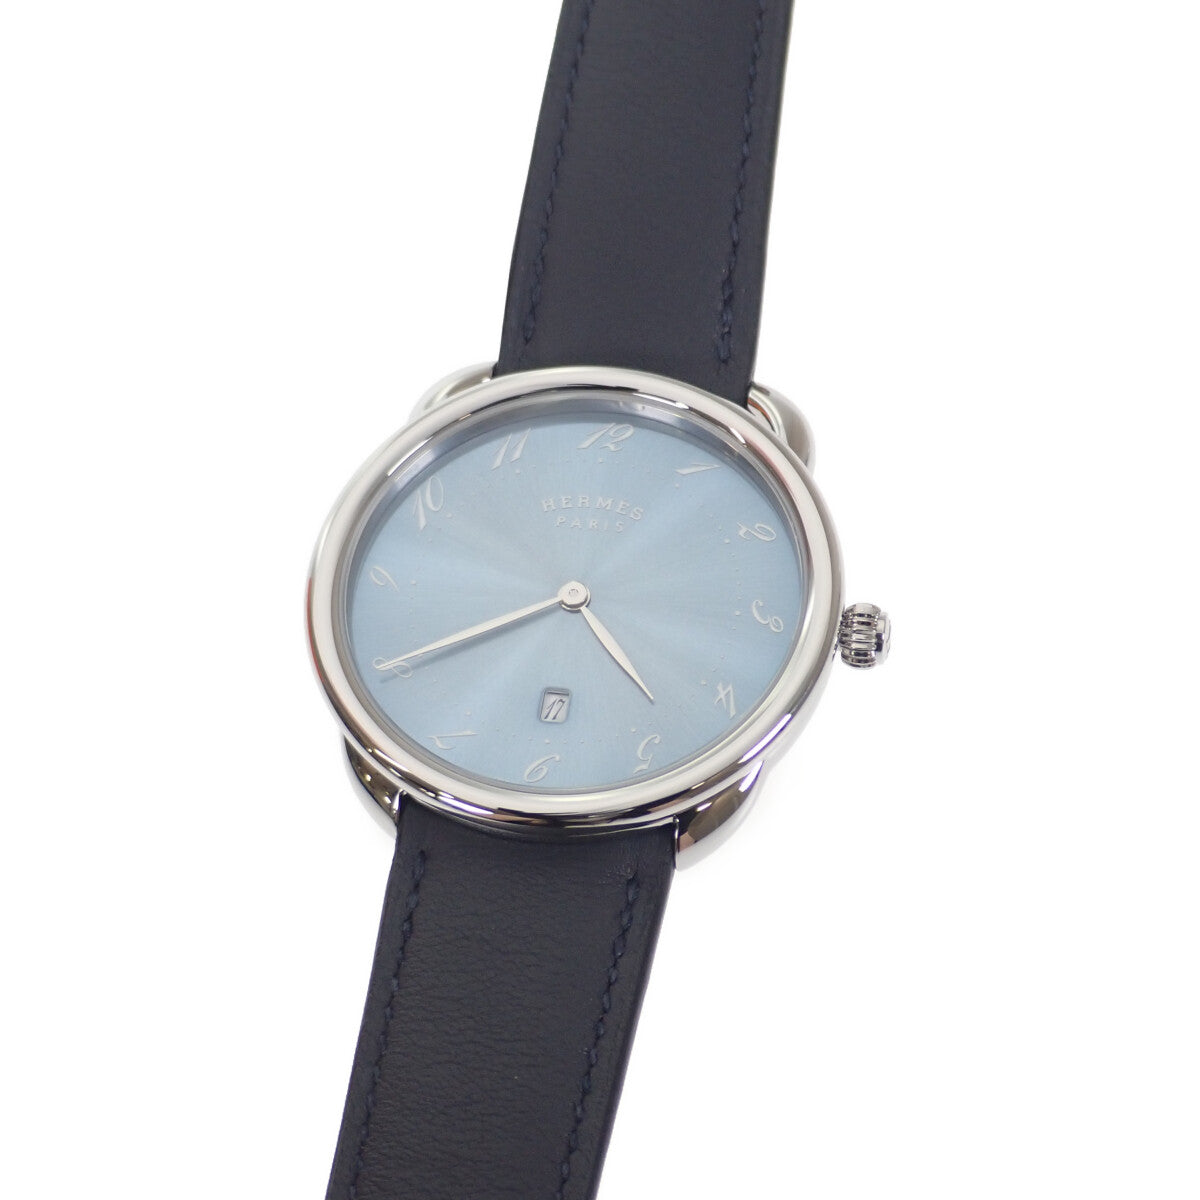 Hermes Men's Arceau GM Watch AR7Q.810 in Stainless Steel and Leather Strap, Blue Dial (Pre-owned)  AR7Q.810